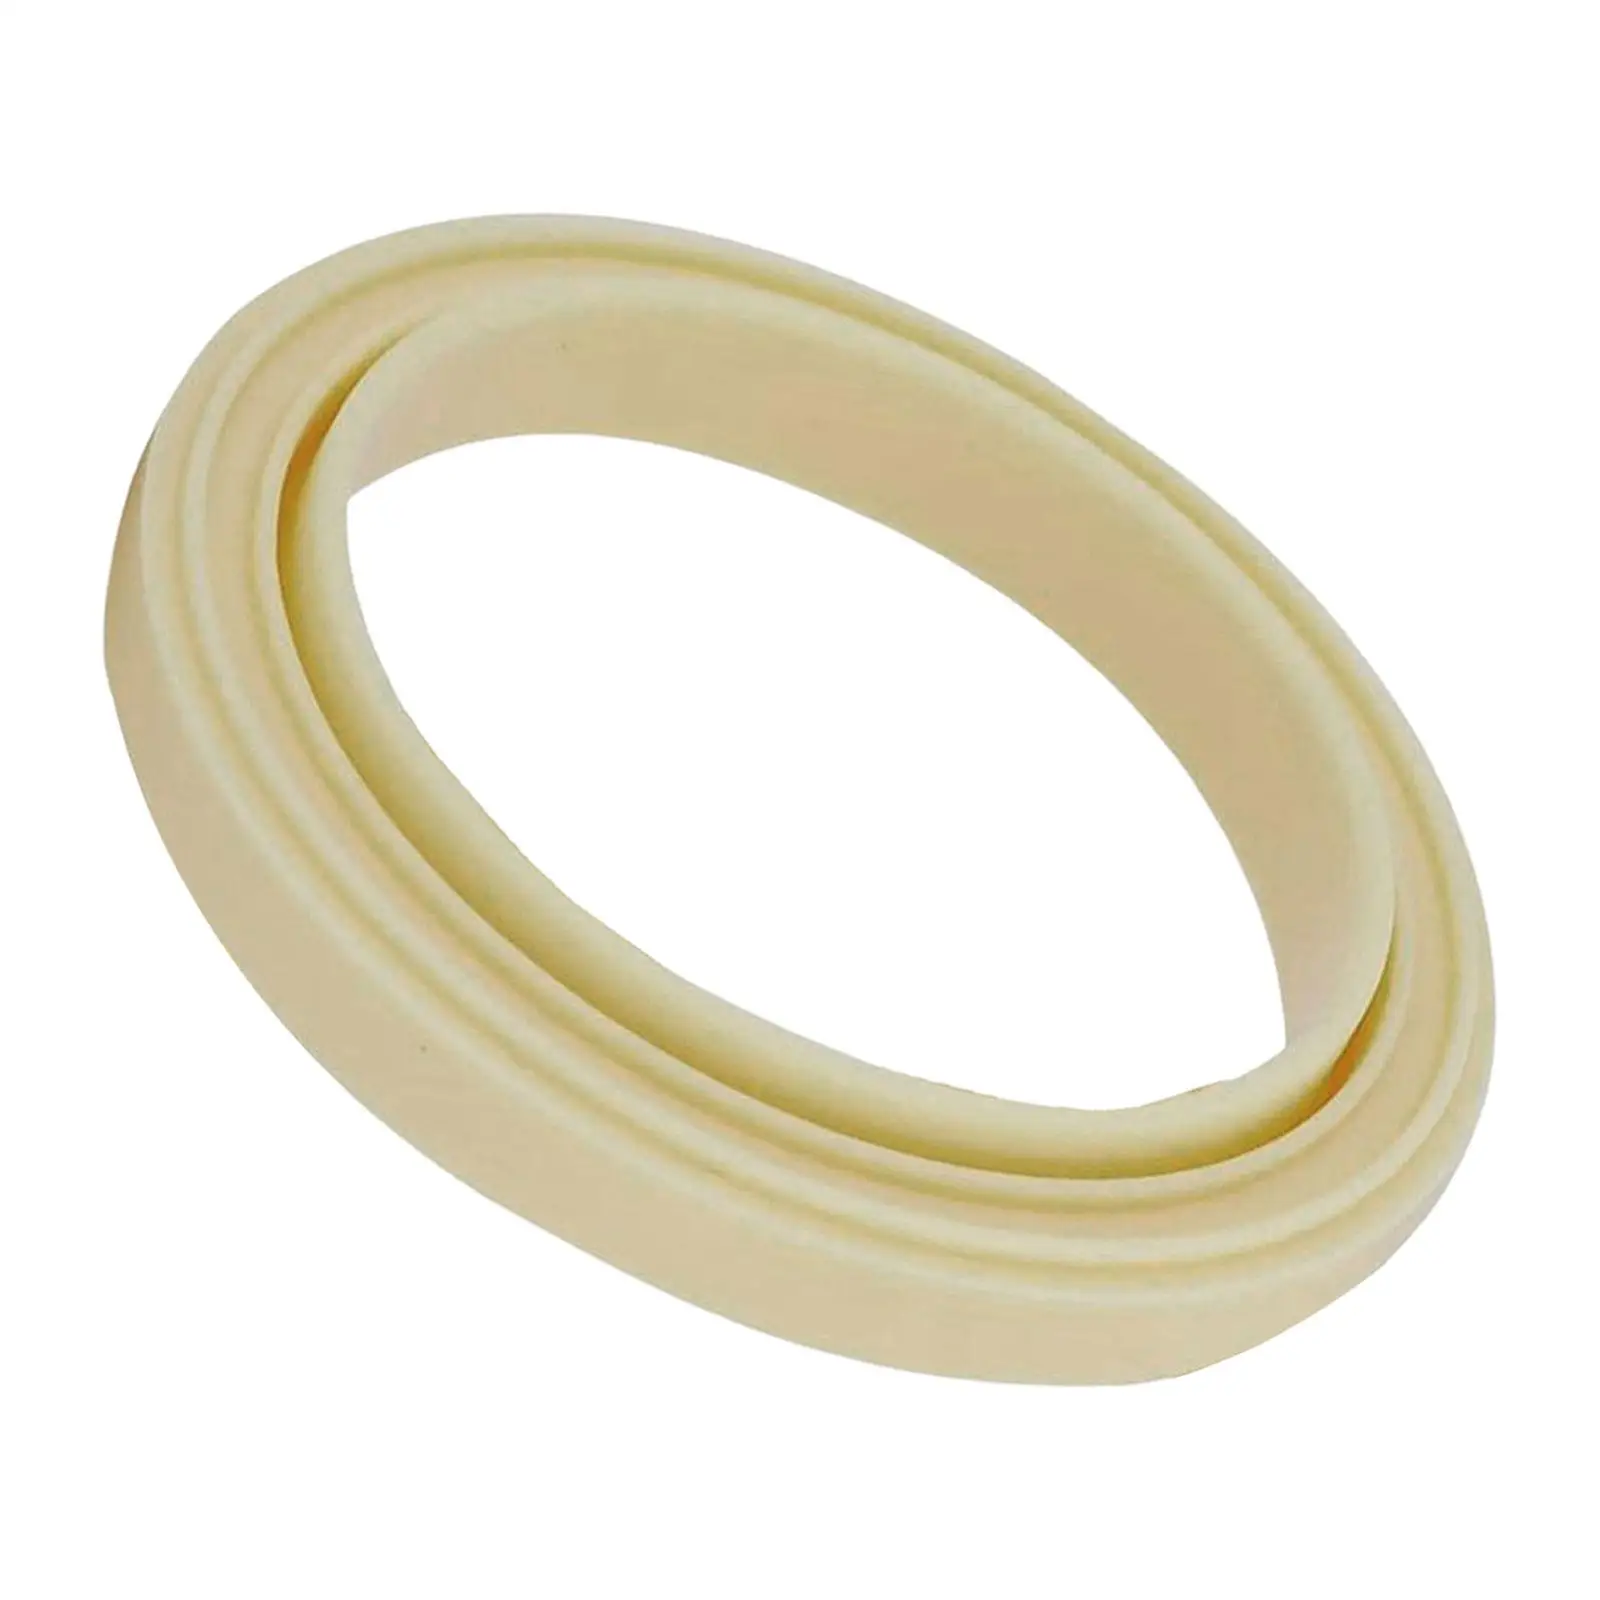 Silicone Steam Rings Replacement Parts Rrofessional Grouphead Gasket for 878 870 860 880 810 840 450 500 Coffee Maker Machine